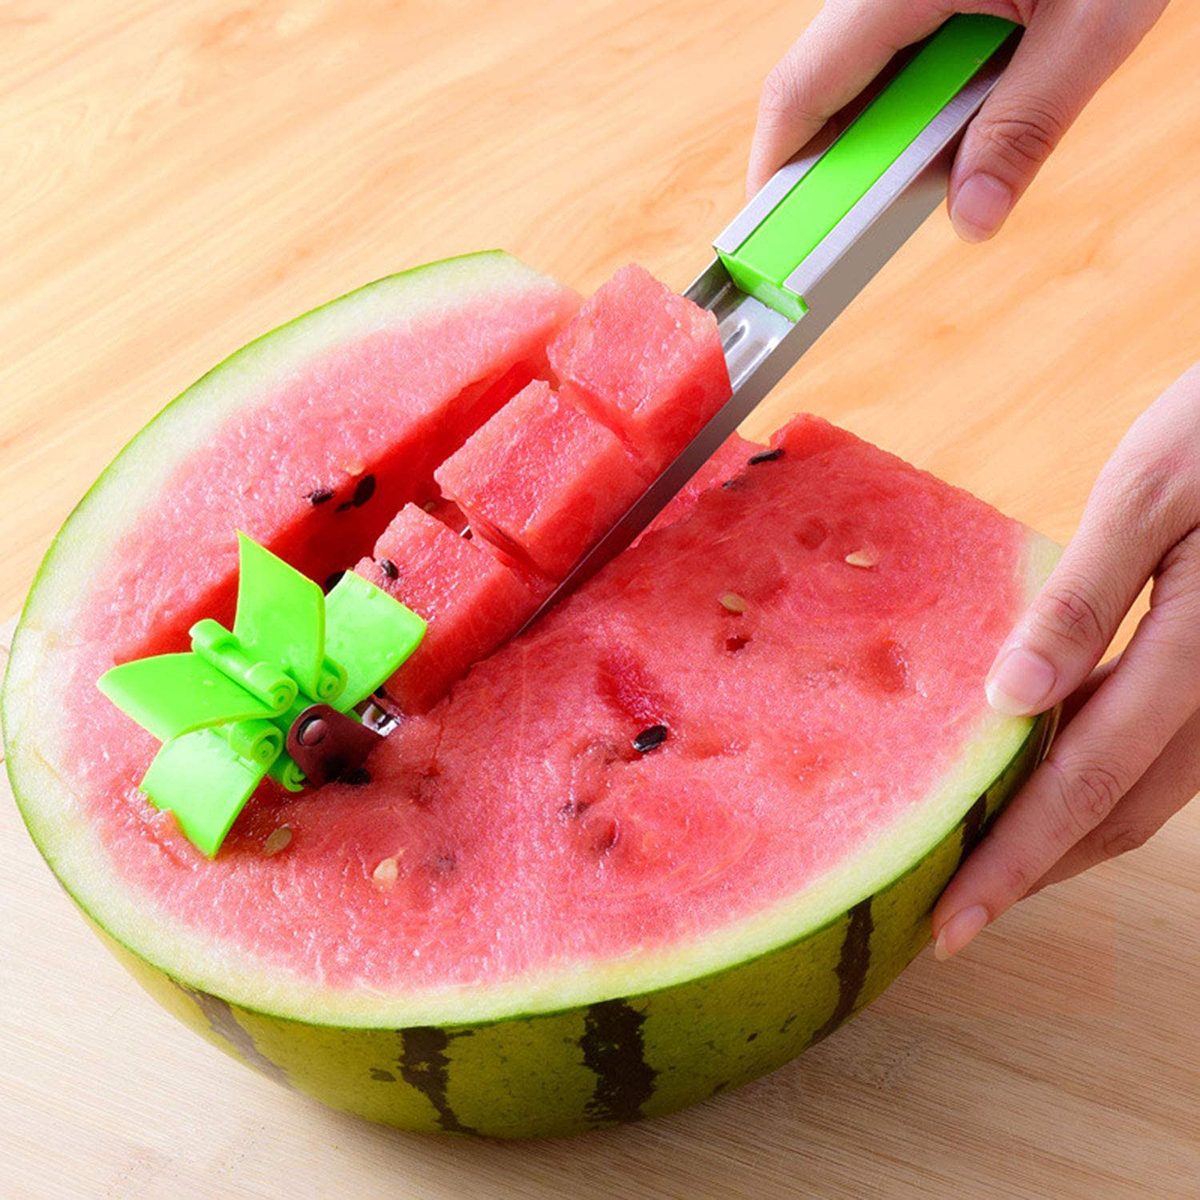 51 Cool and Quirky Kitchen Gadgets That Are Actually Useful